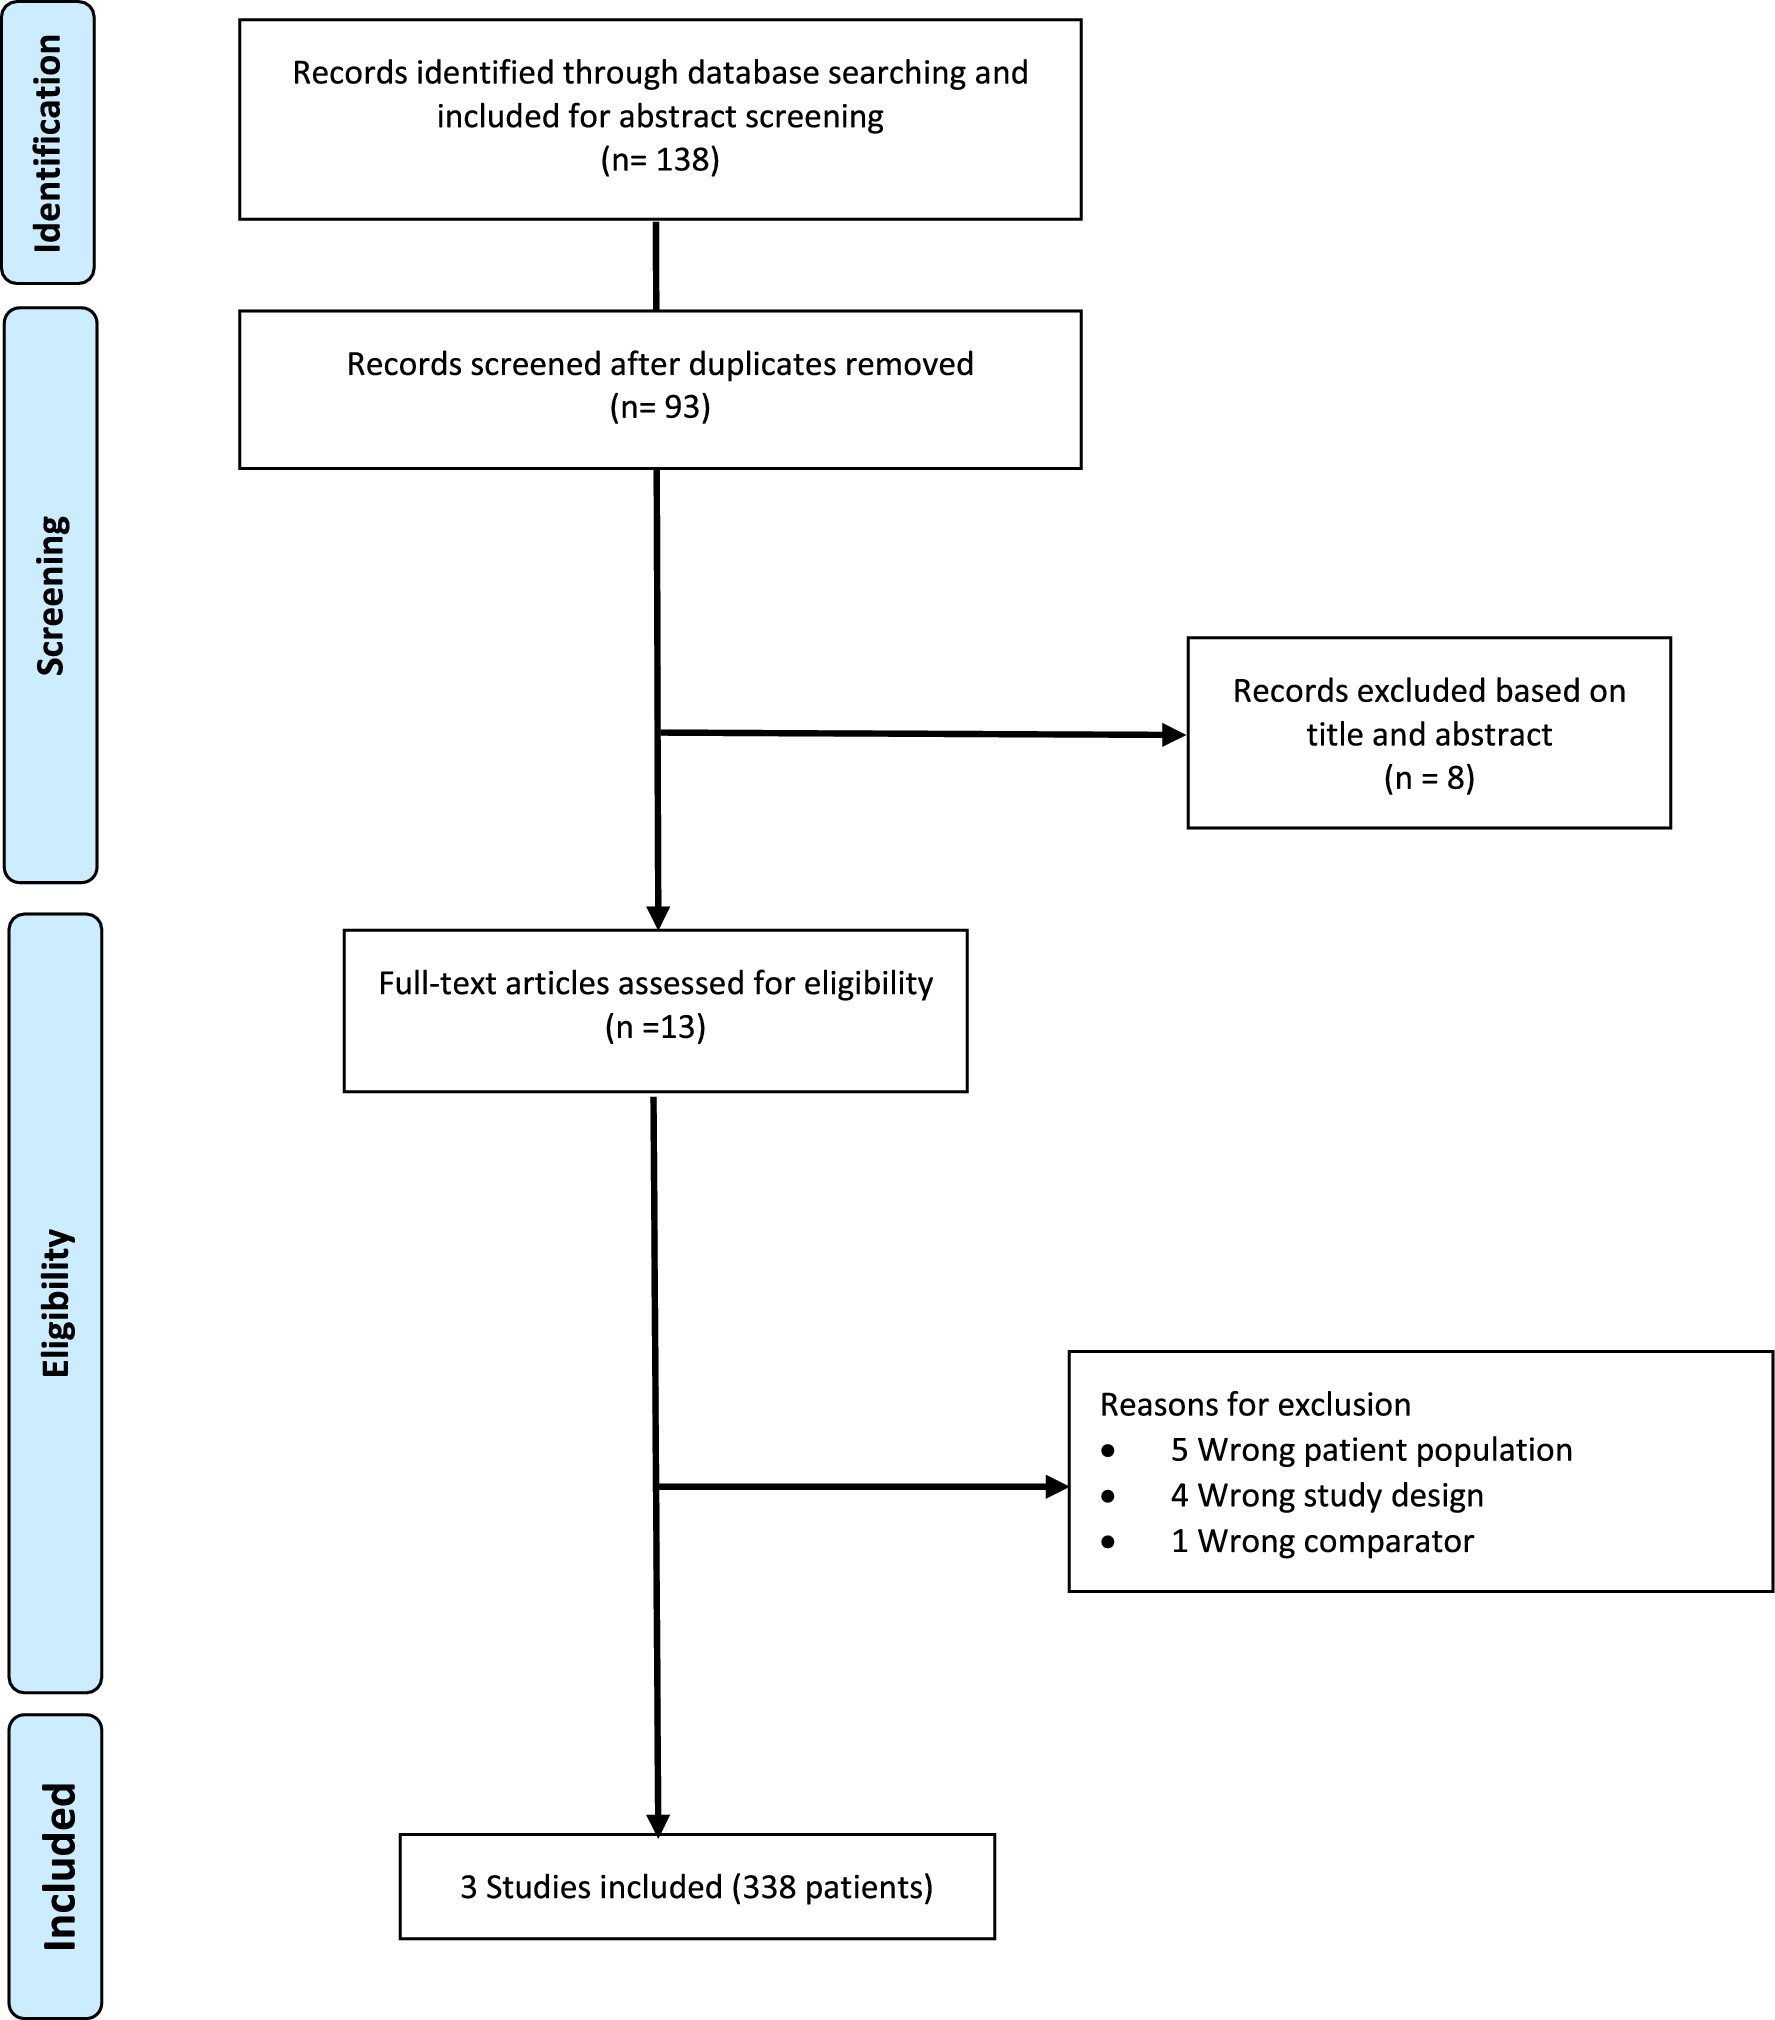 Liposomal bupivacaine versus conventional anesthetic or placebo for hemorrhoidectomy: a systematic review and meta-analysis